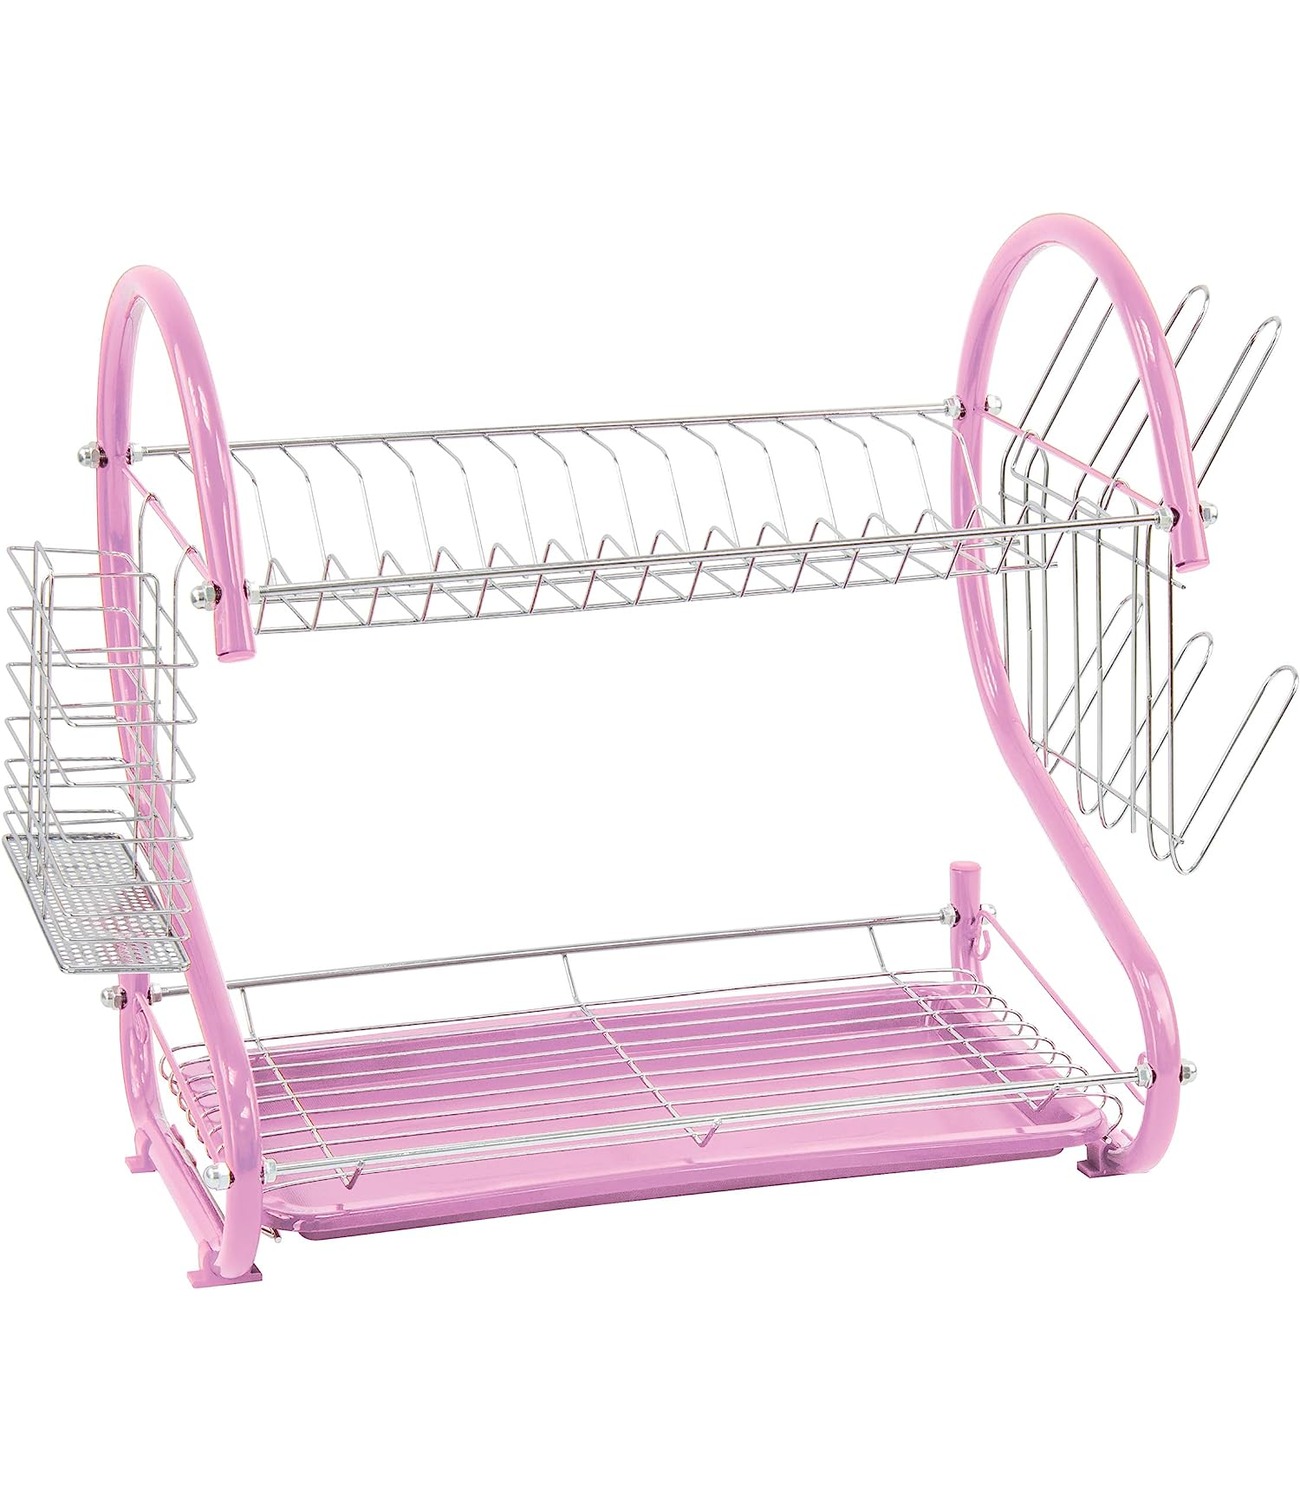 2 Compartment Dish Rack (Purple Tube & Pink Layer)